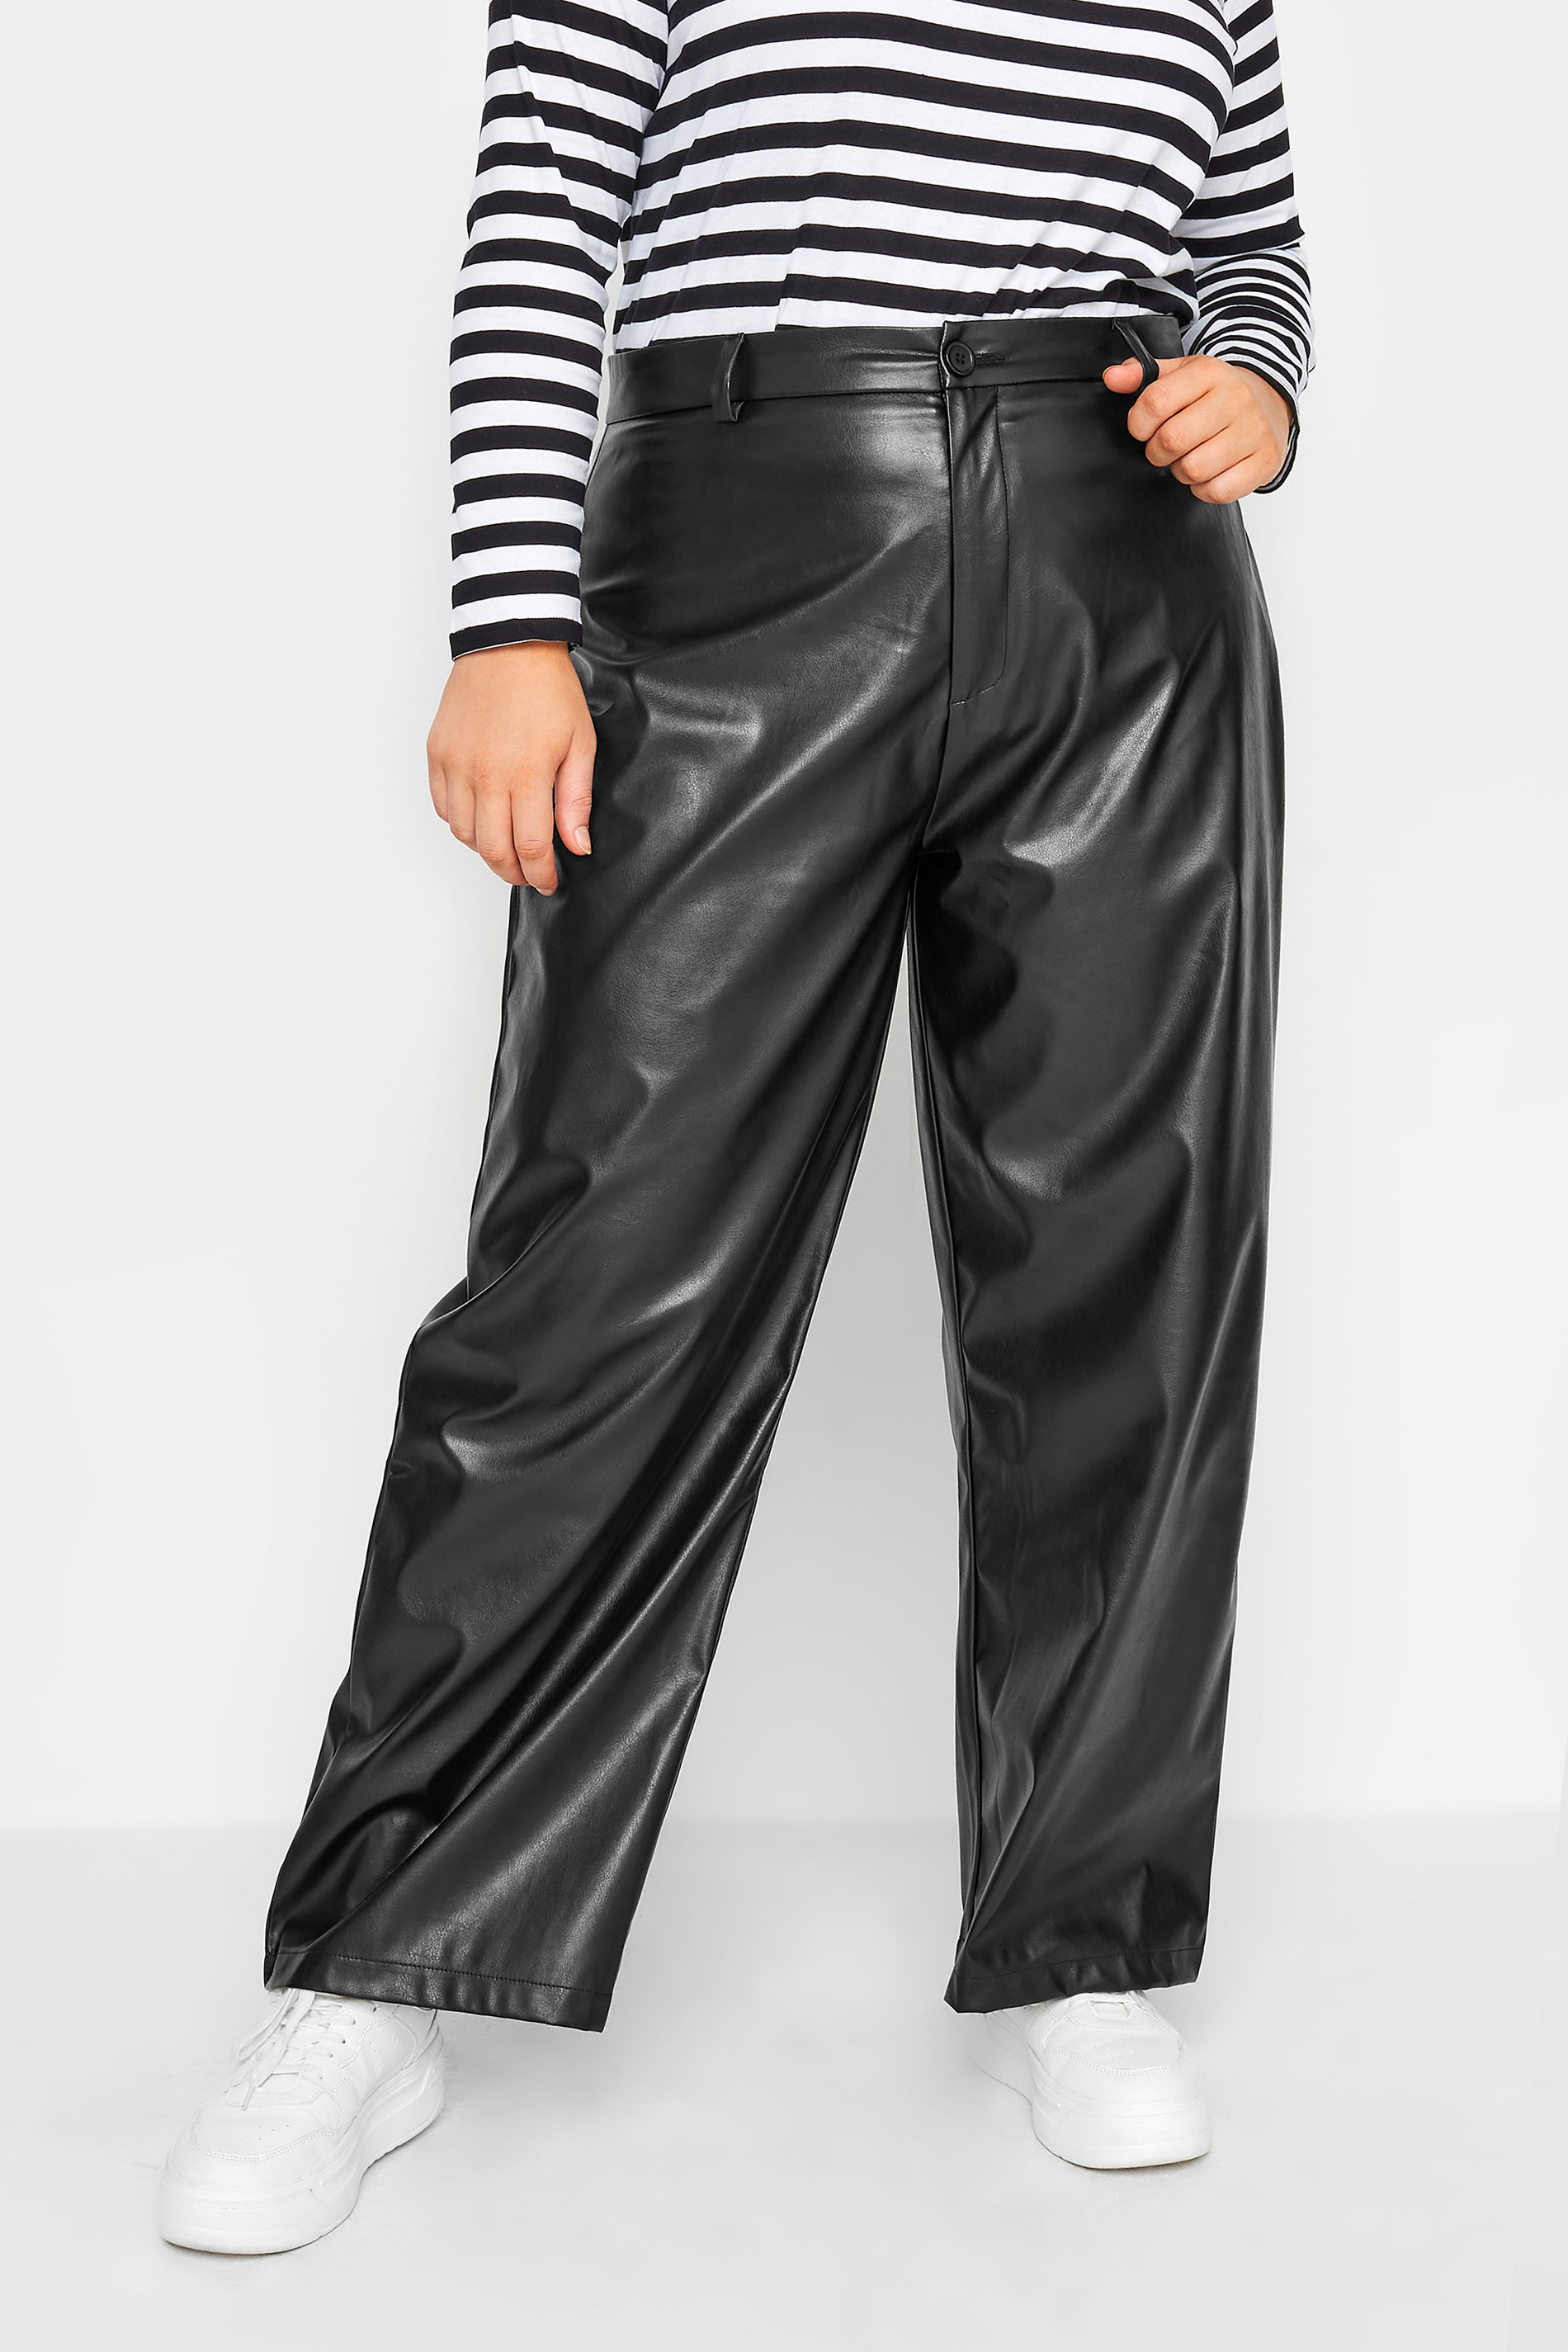 YOURS Plus Size Black Faux Leather Wide Leg Dad Trousers | Yours Clothing 1